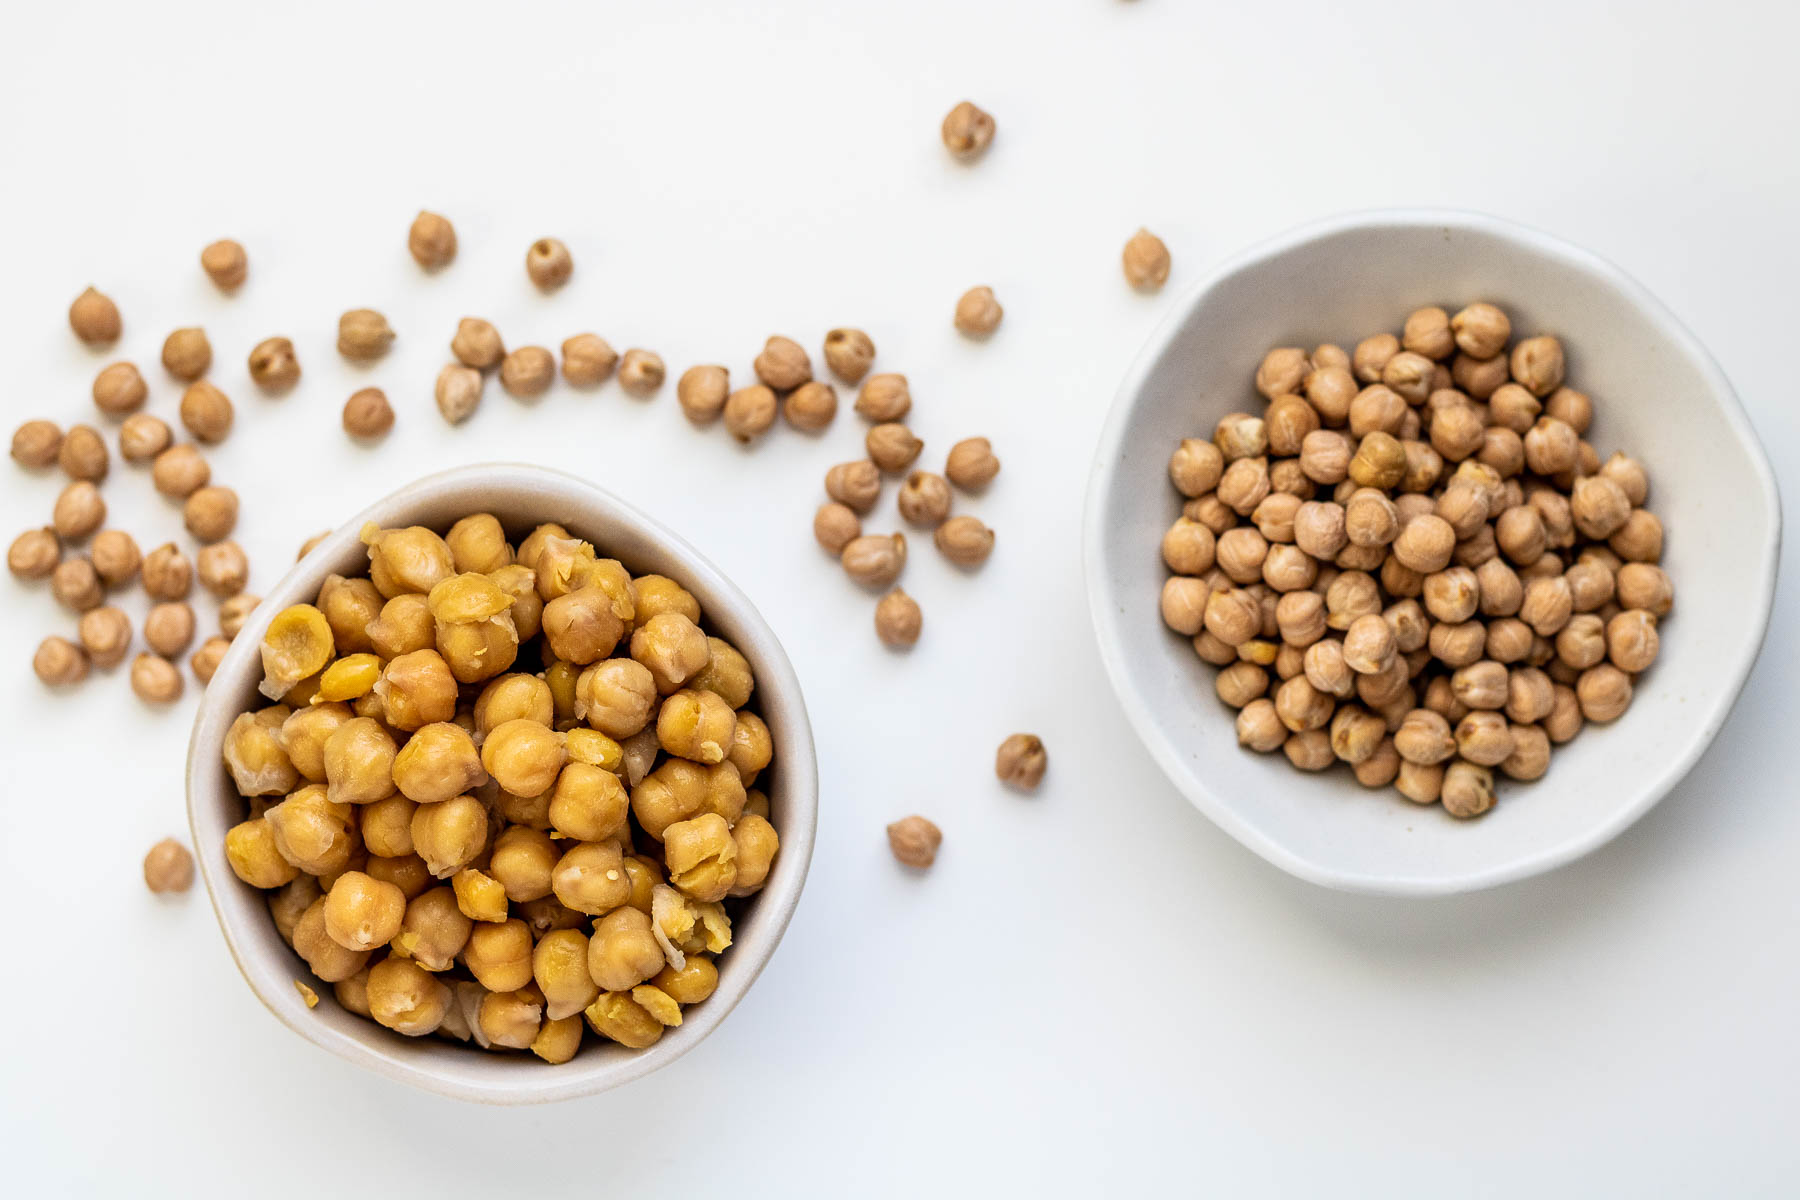 a bowl of cooked chickpeas on the left and a bowl of dried chickpeas on the right.